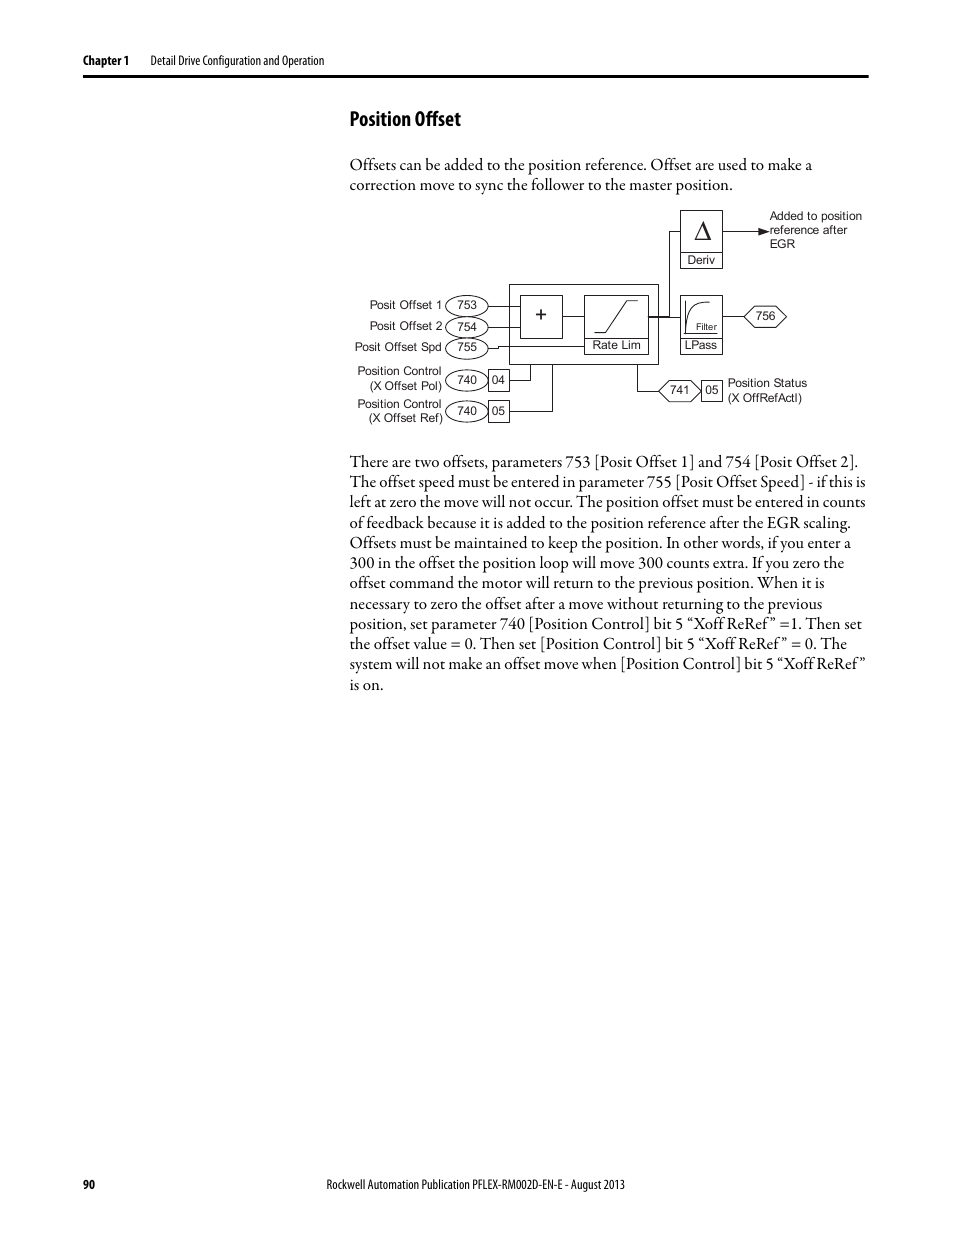 Position offset | Rockwell Automation 20D PowerFlex 700S with Phase I Control Reference Manual User Manual | Page 90 / 190